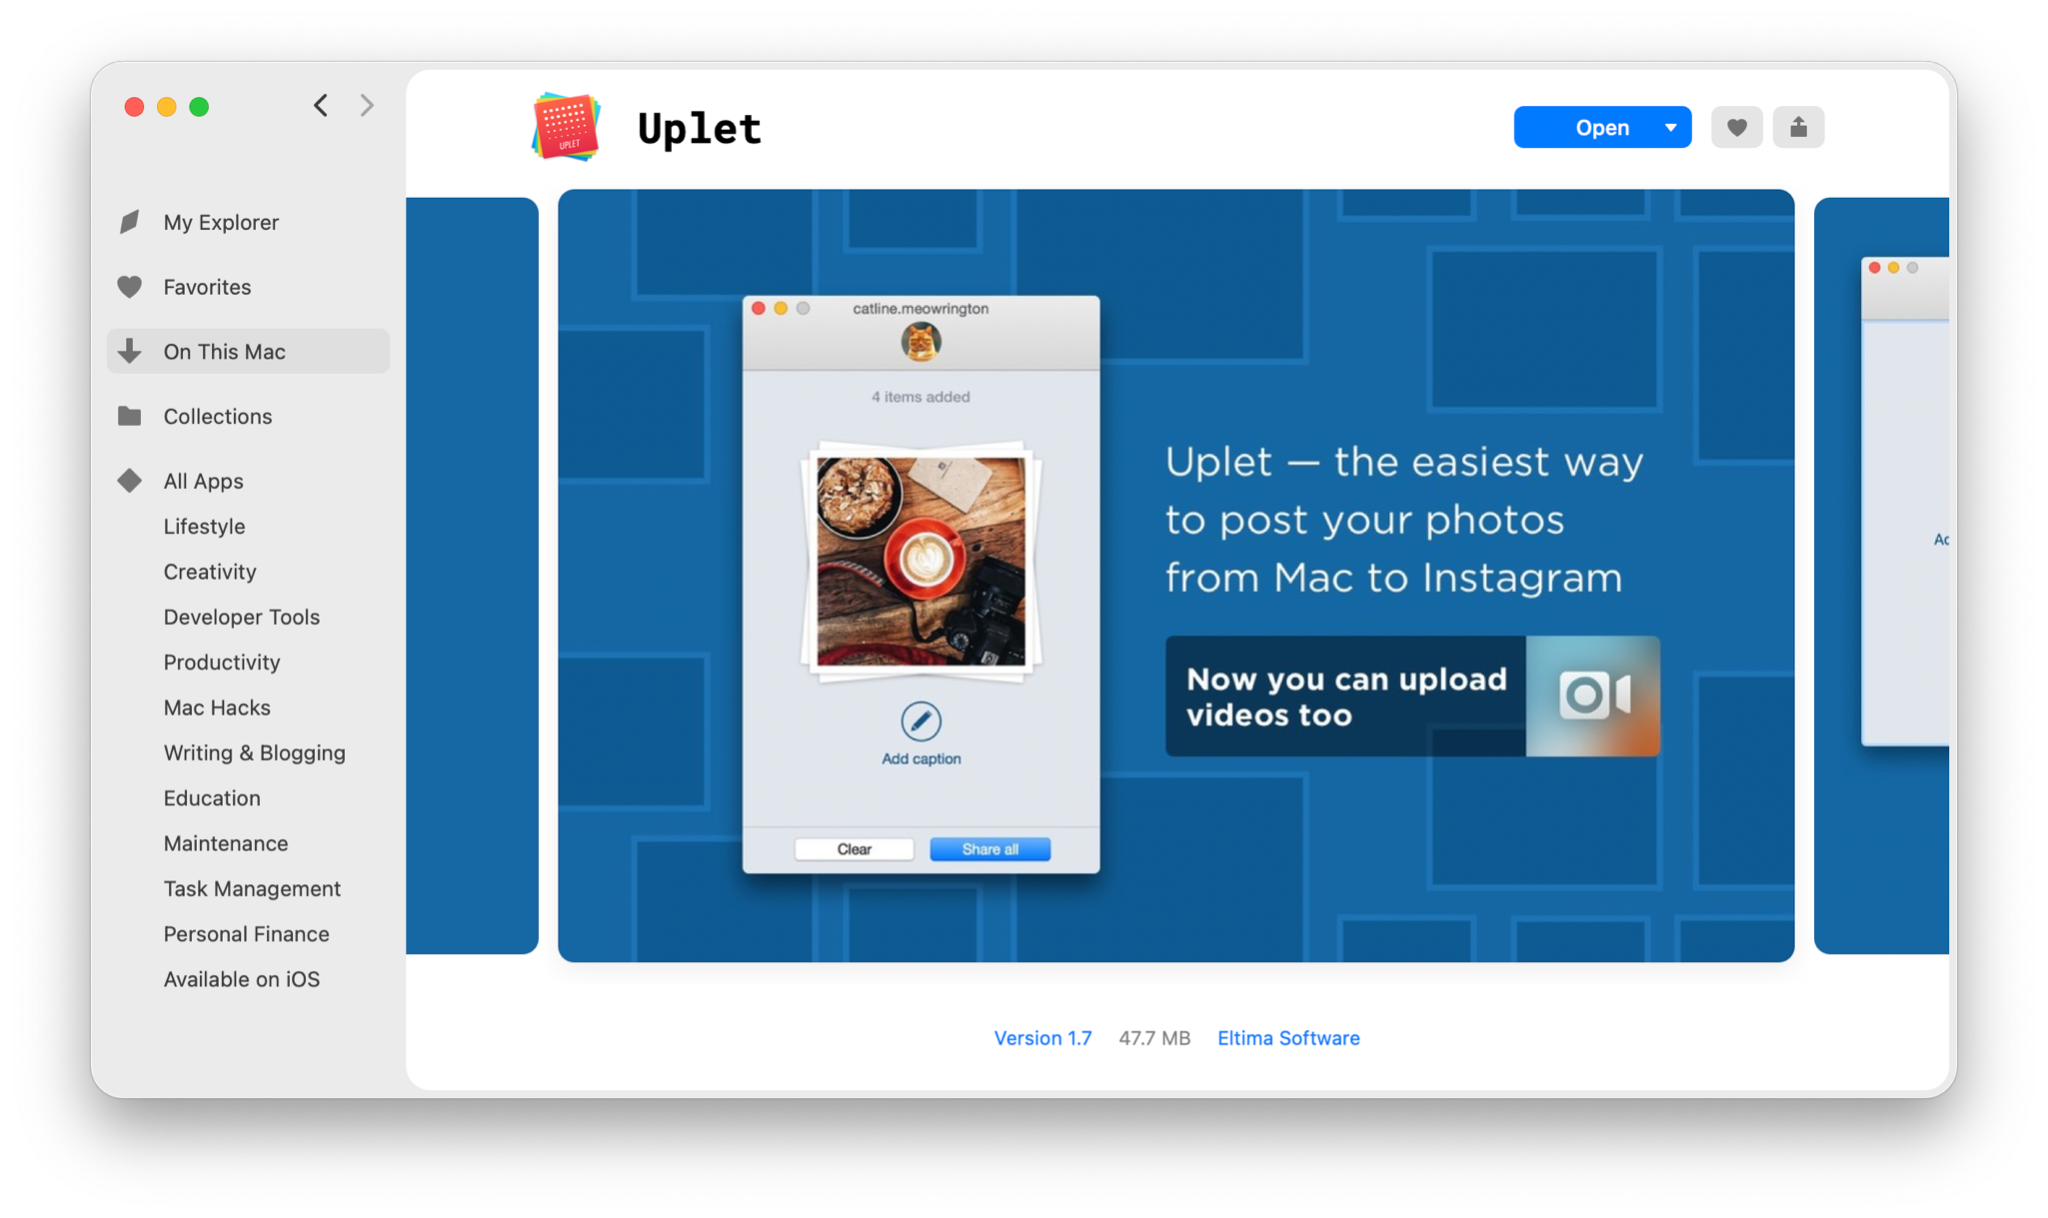 Uplet, the app to post your photos from Mac to Instagram